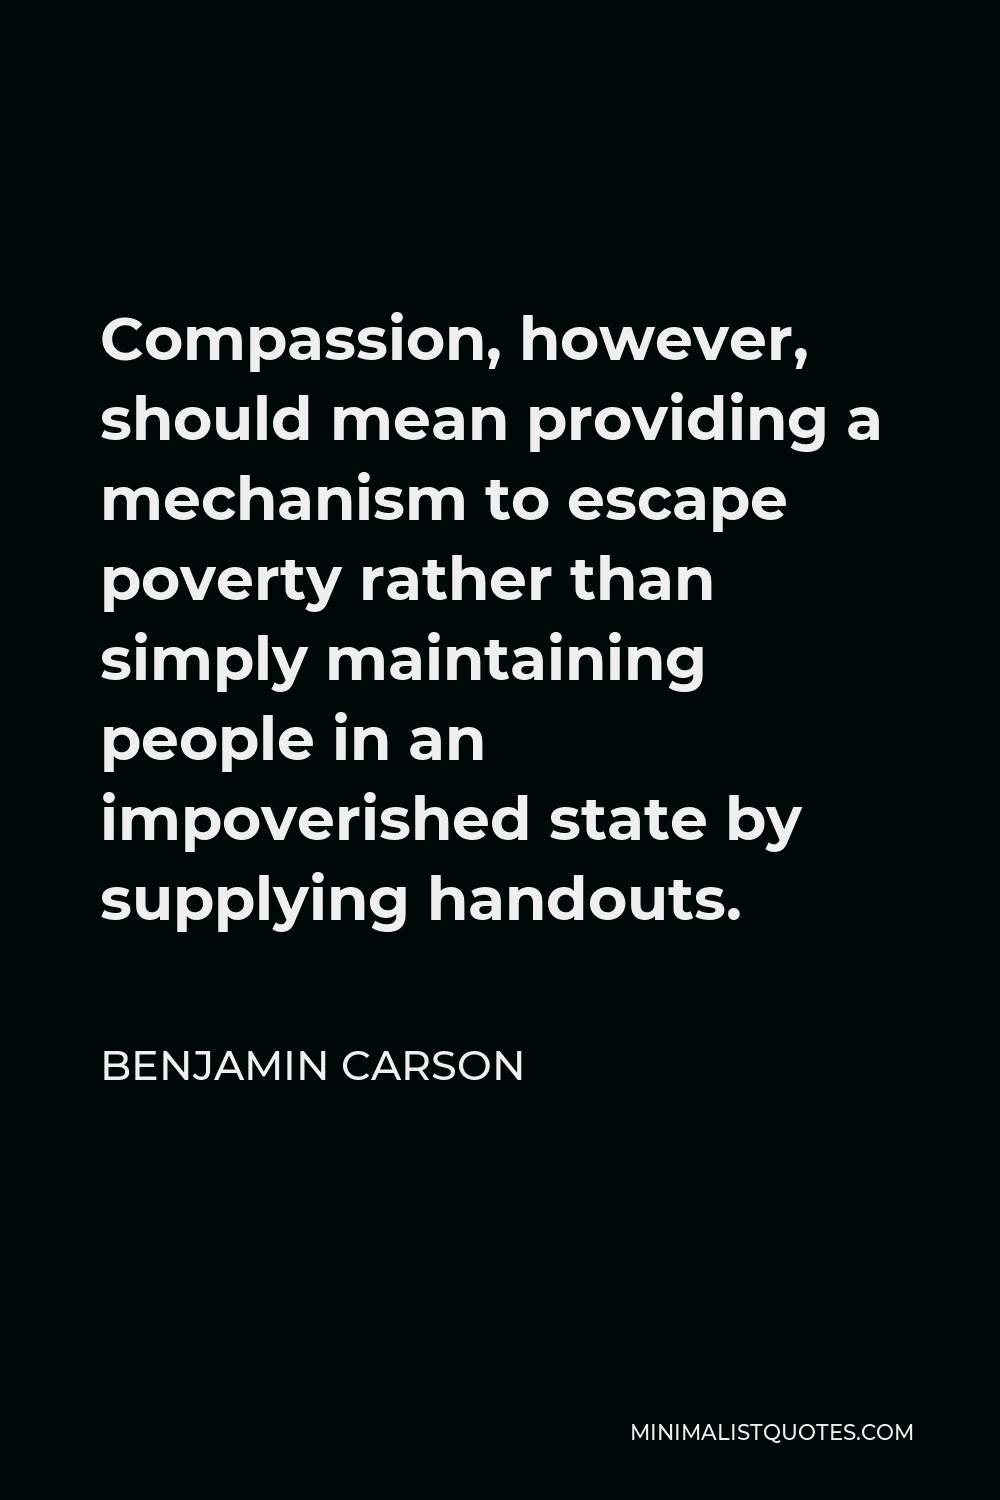 Benjamin Carson Quote - Compassion, however, should mean providing a mechanism to escape poverty rather than simply maintaining people in an impoverished state by supplying handouts.